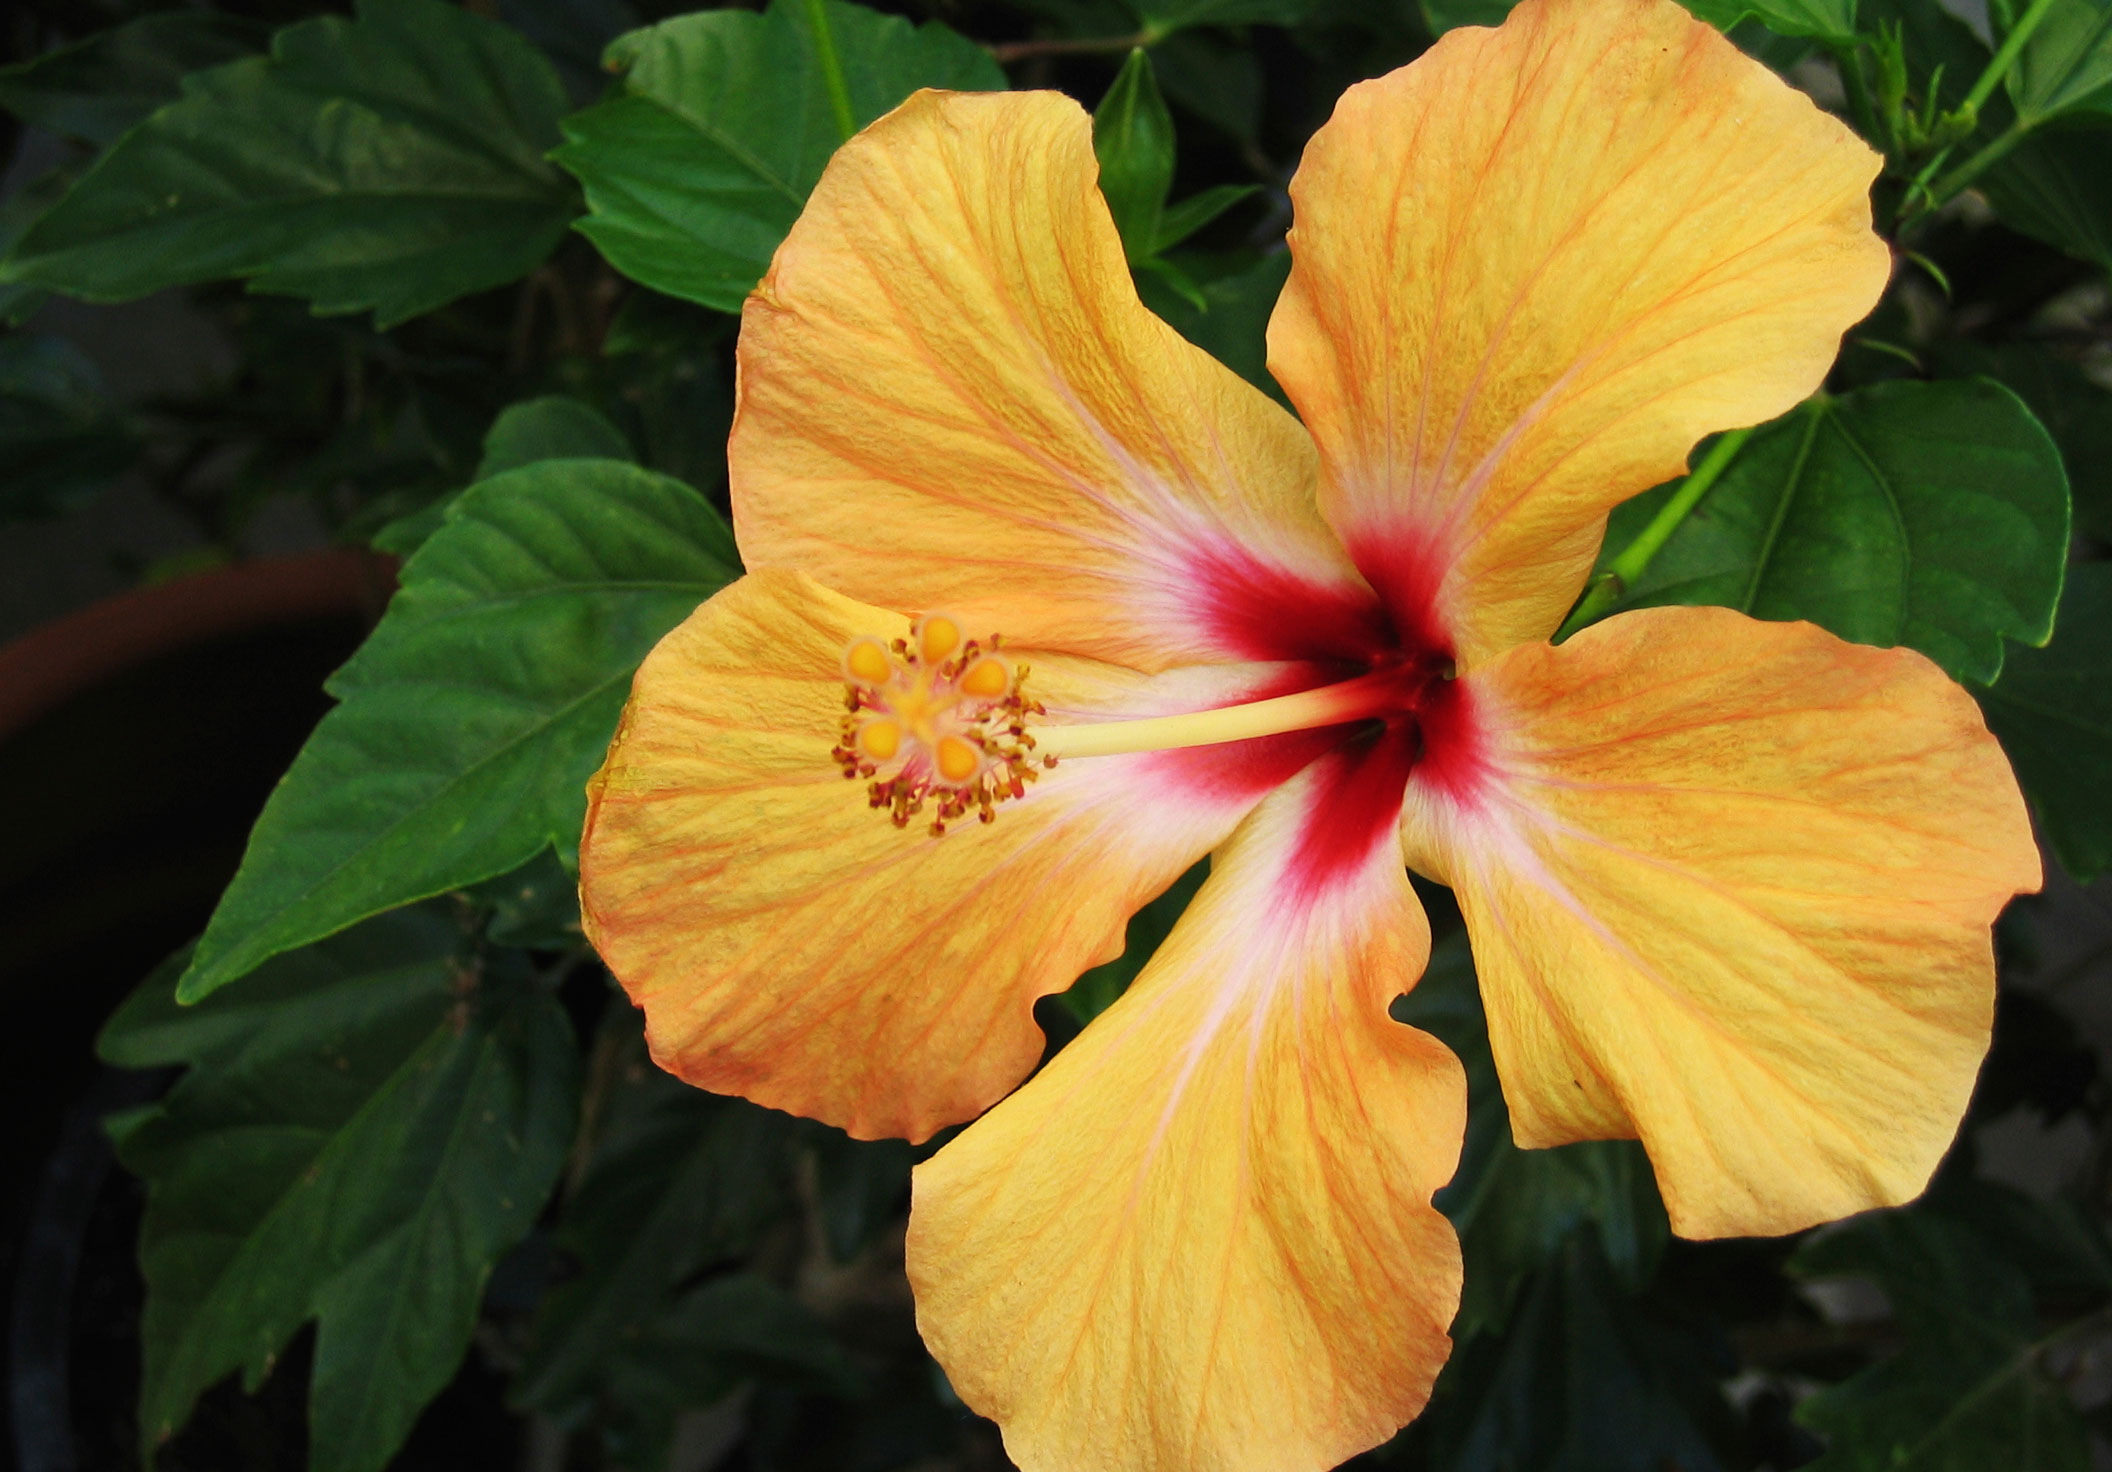 Best Medicinal Uses of Hibiscus Plant and Flower